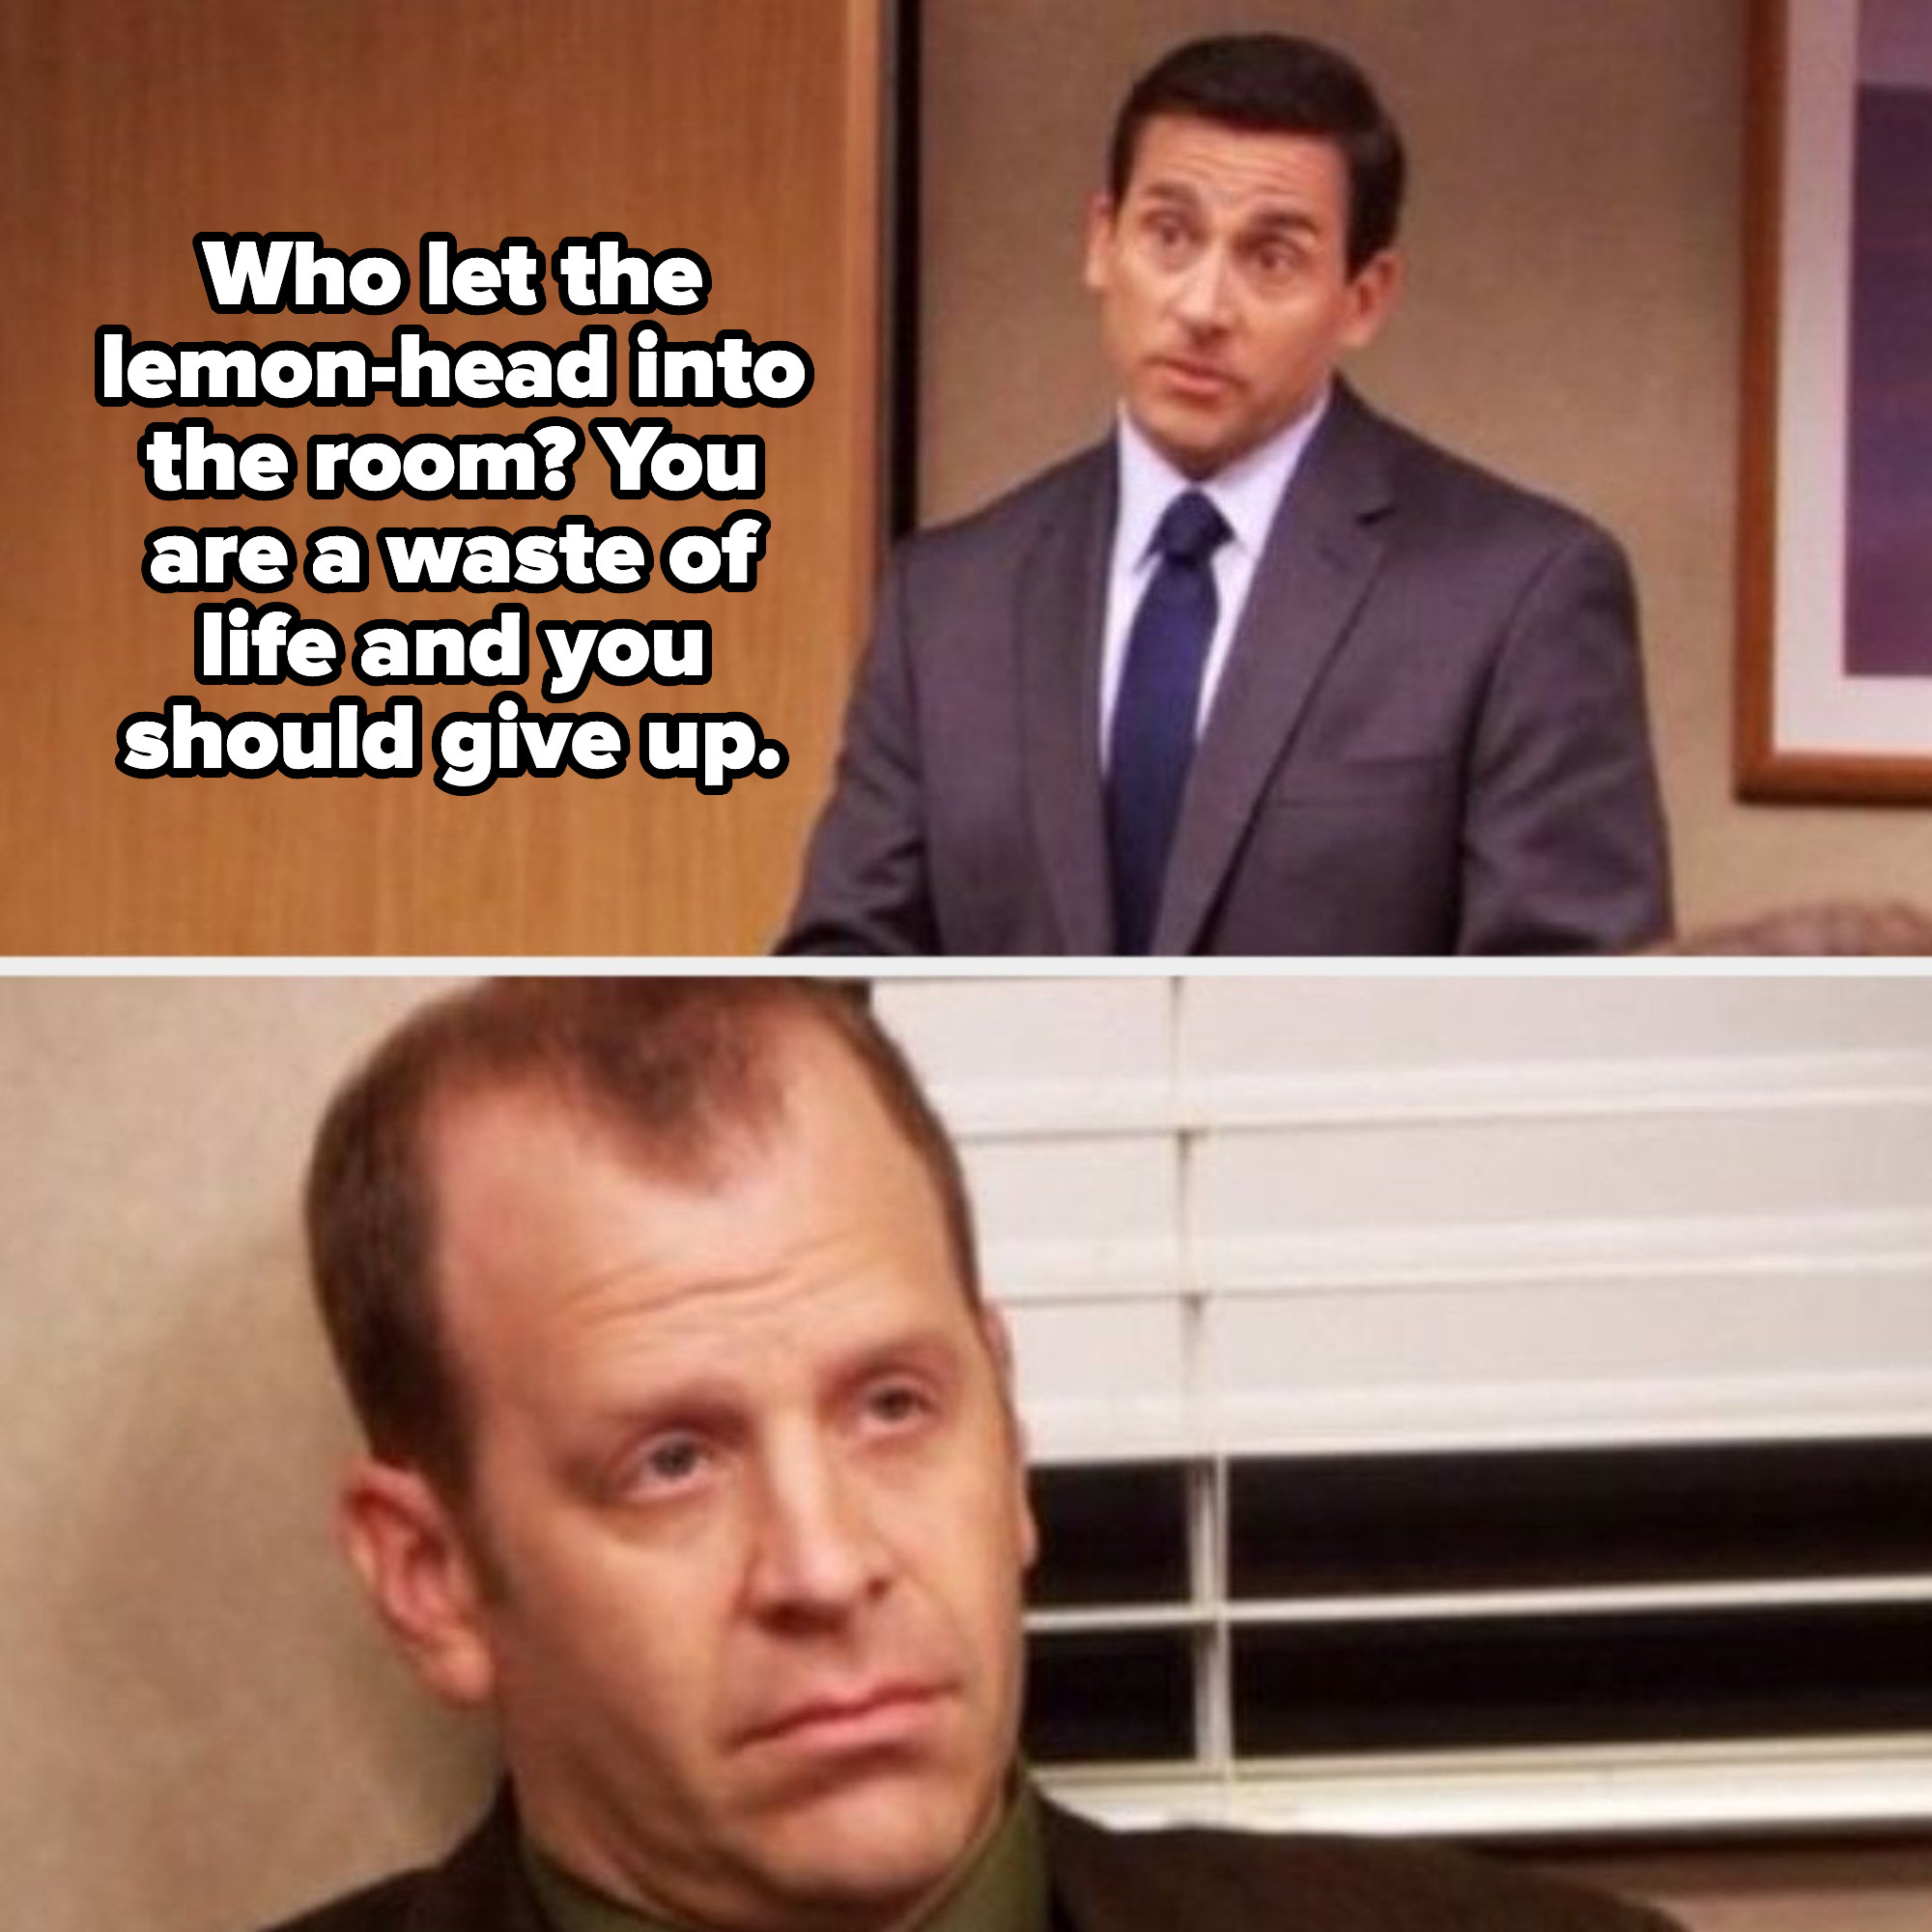 Michael Scott telling Toby: &quot;Who let the lemon-head into the room? You are a waste of life and you should give up&quot;